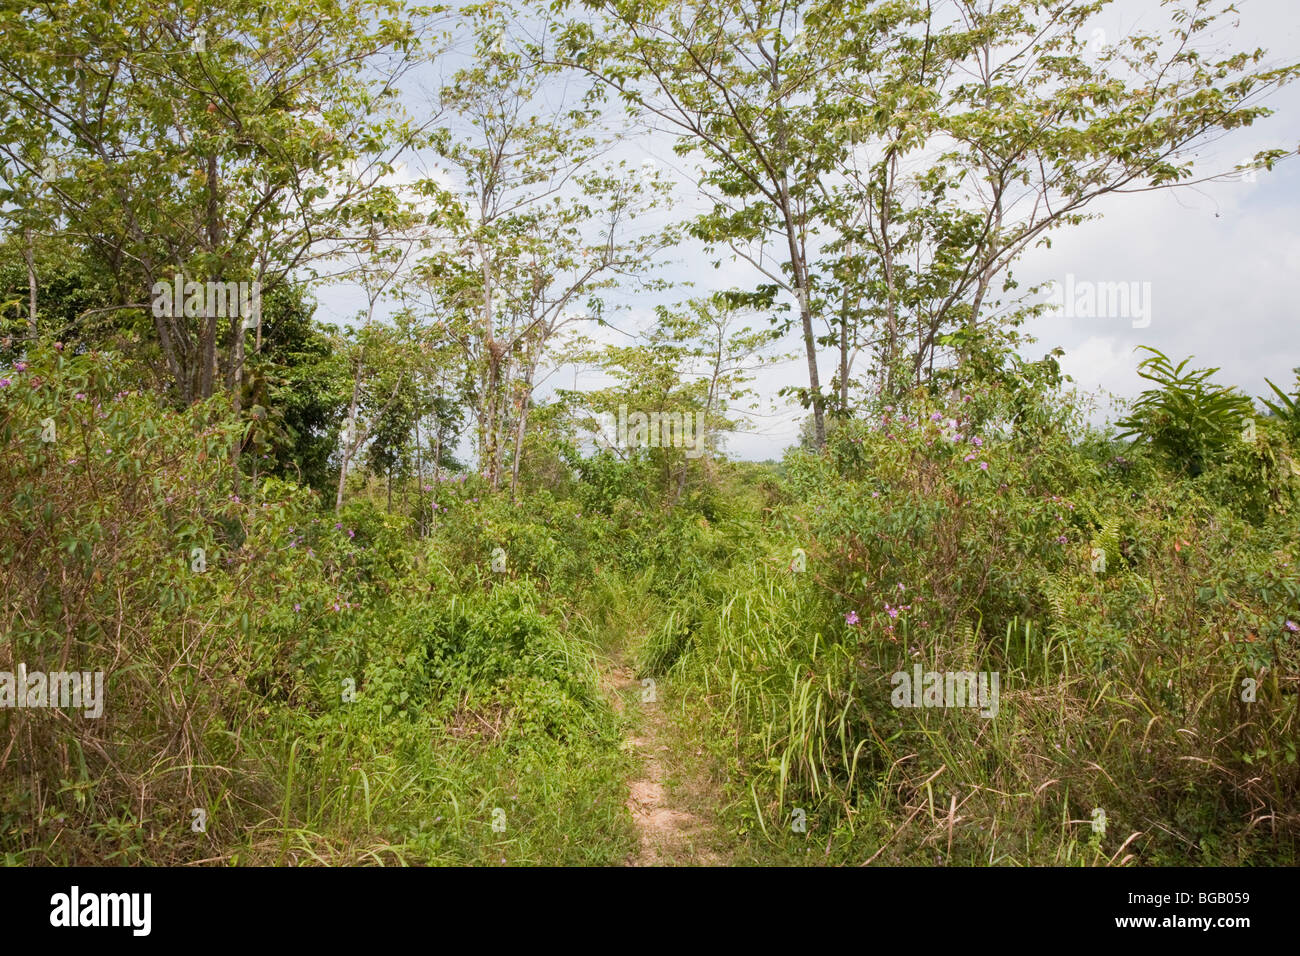 Forested section on the Sindora Palm Oil Plantation Stock Photo